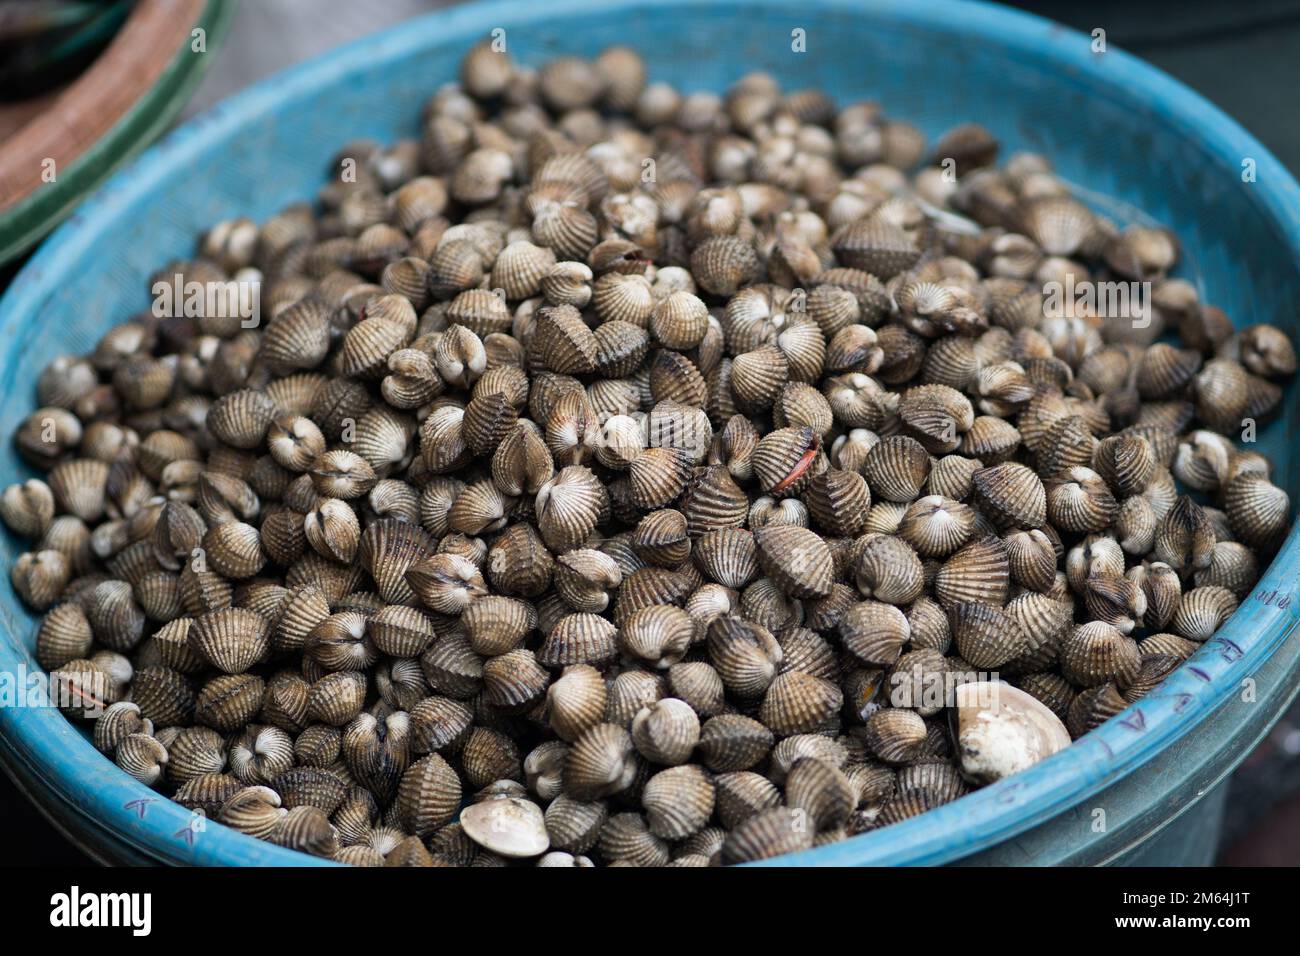 Clams in the plastic container sold in fish market. Stock Photo